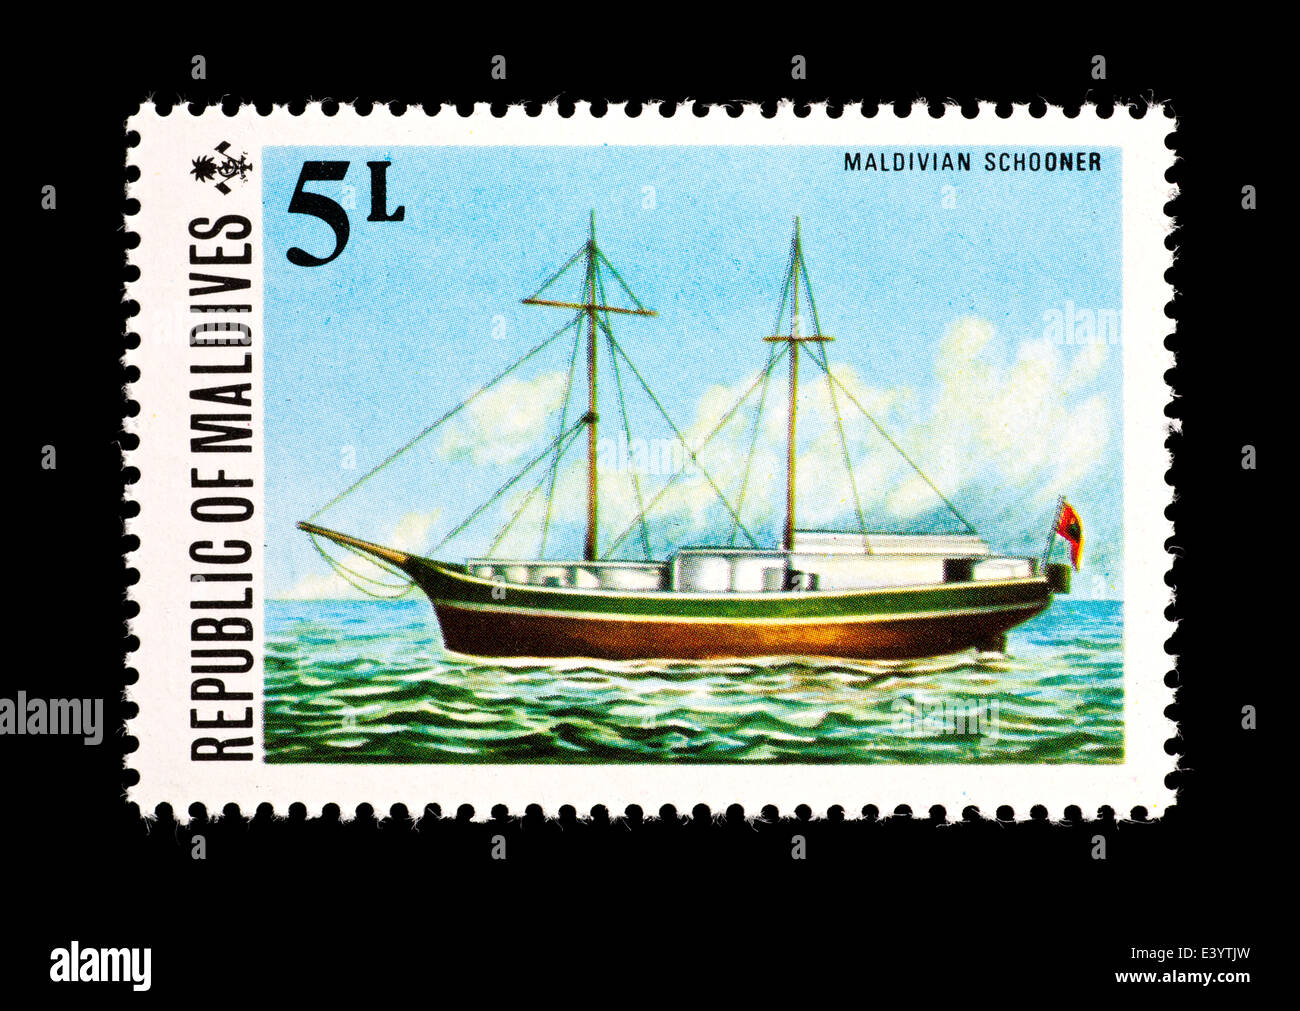 Postage stamp from the Maldive Islands depicting a Maldivian schooner. Stock Photo